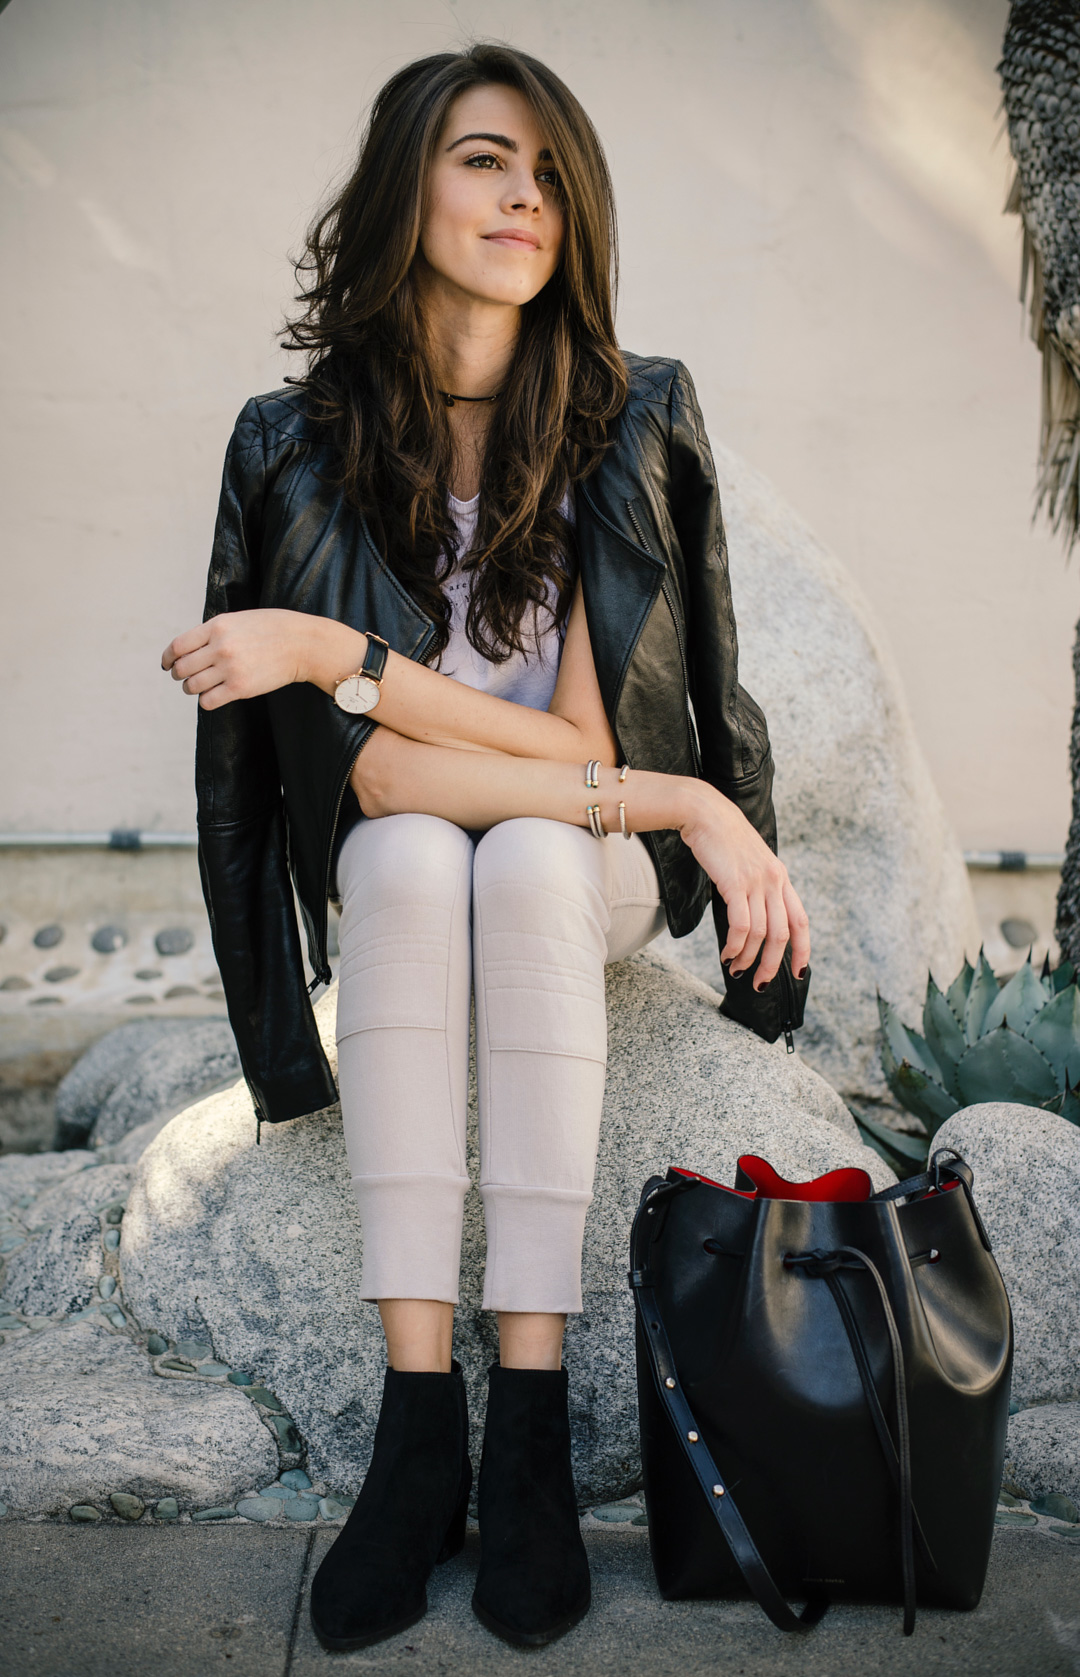 Jackie Roque styling Sincerely Jules Joggers, Mansur Gavriel Bucket Bag and a leather jacket